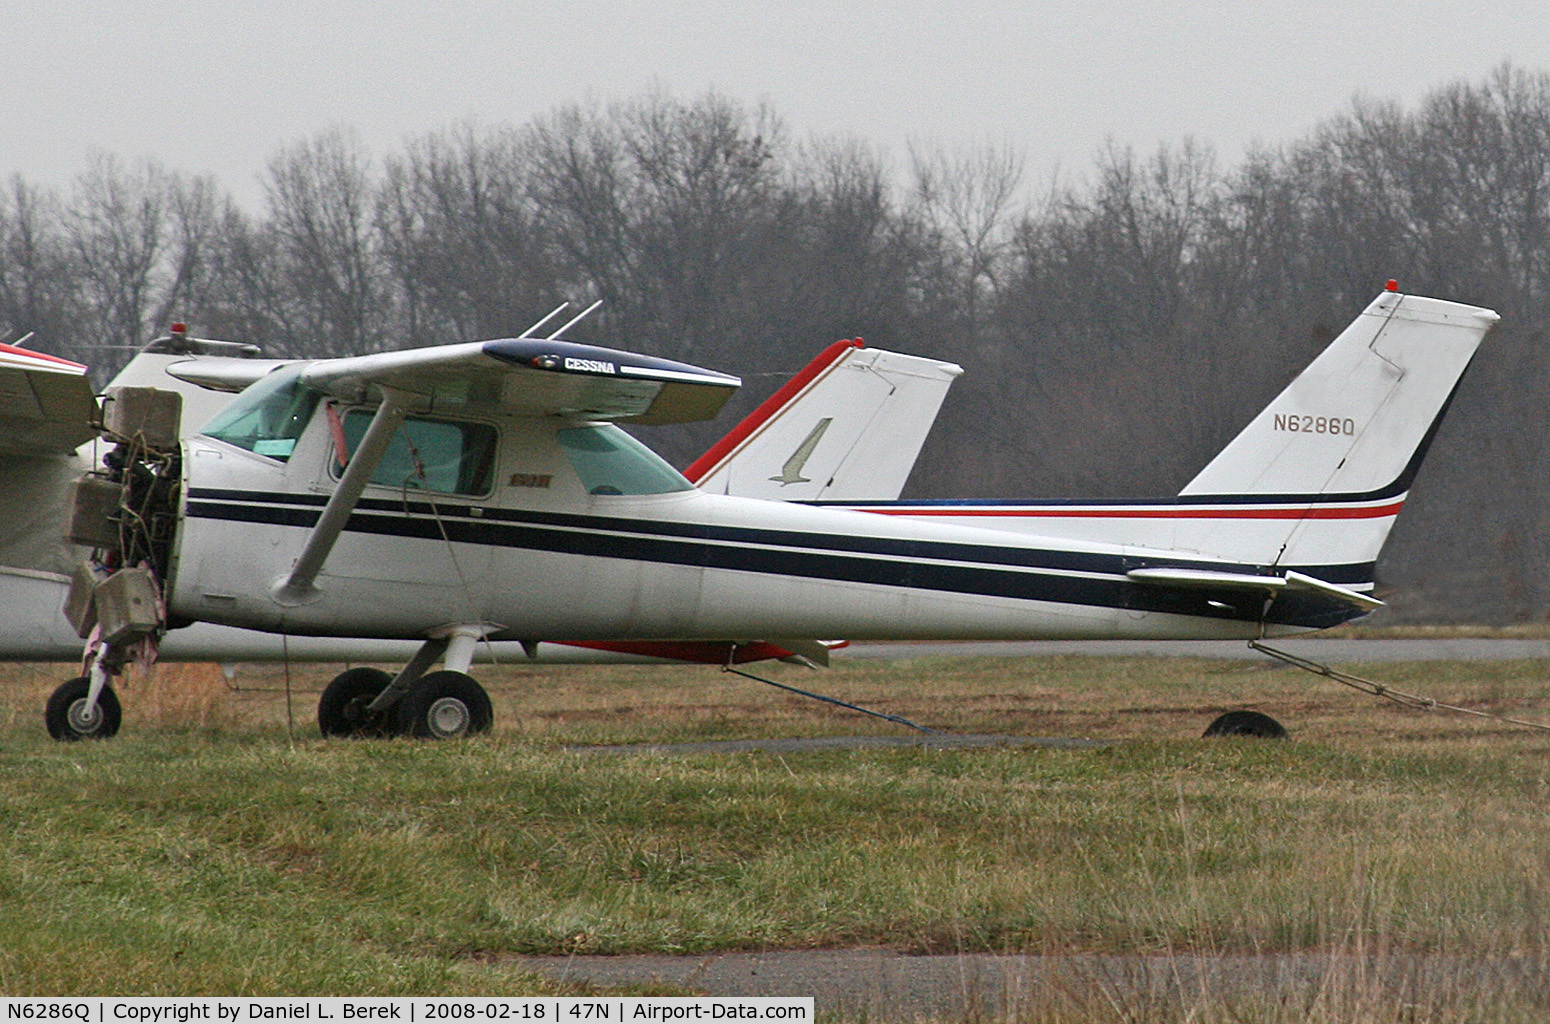 N6286Q, 1981 Cessna 152 C/N 15285220, Bereft of her engine, will this lady fly again?